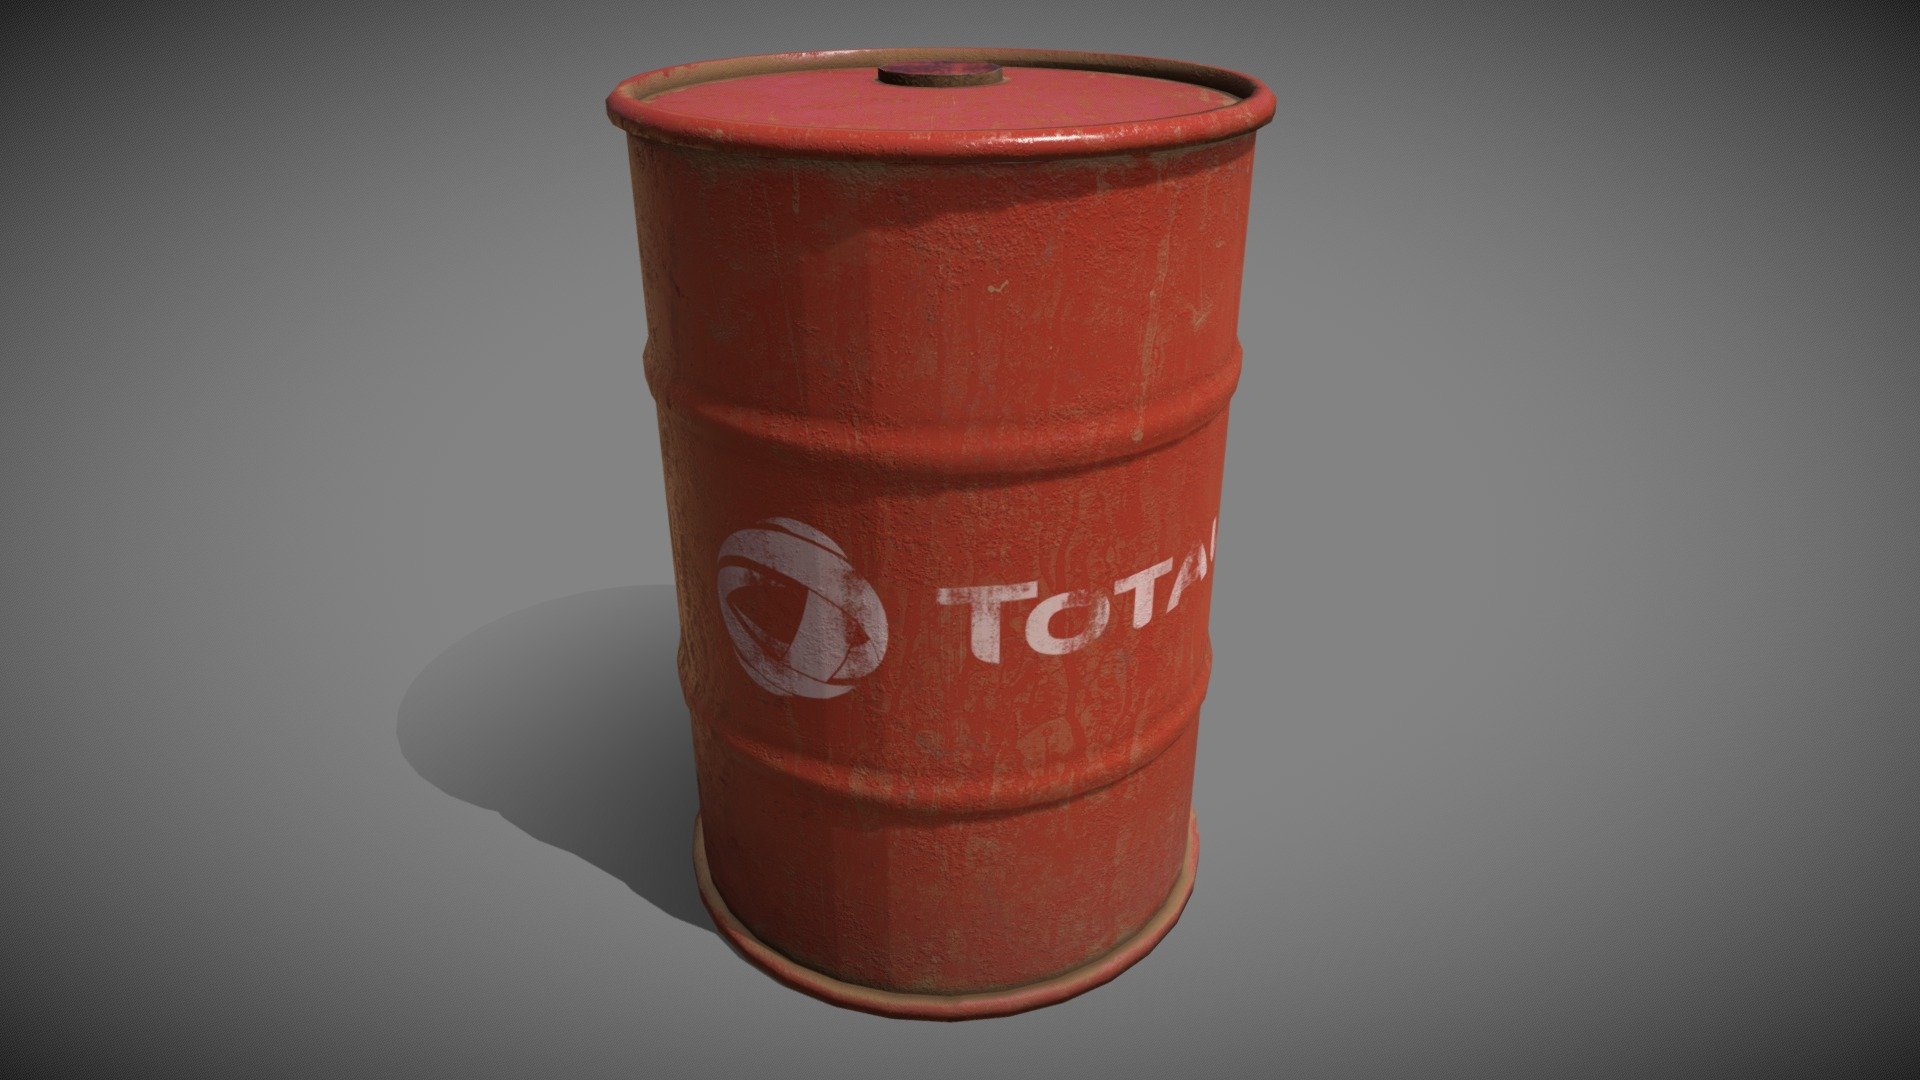 A red Total fuel barrel. Dirty and rusty. Low Poly model ready for game use 3d model